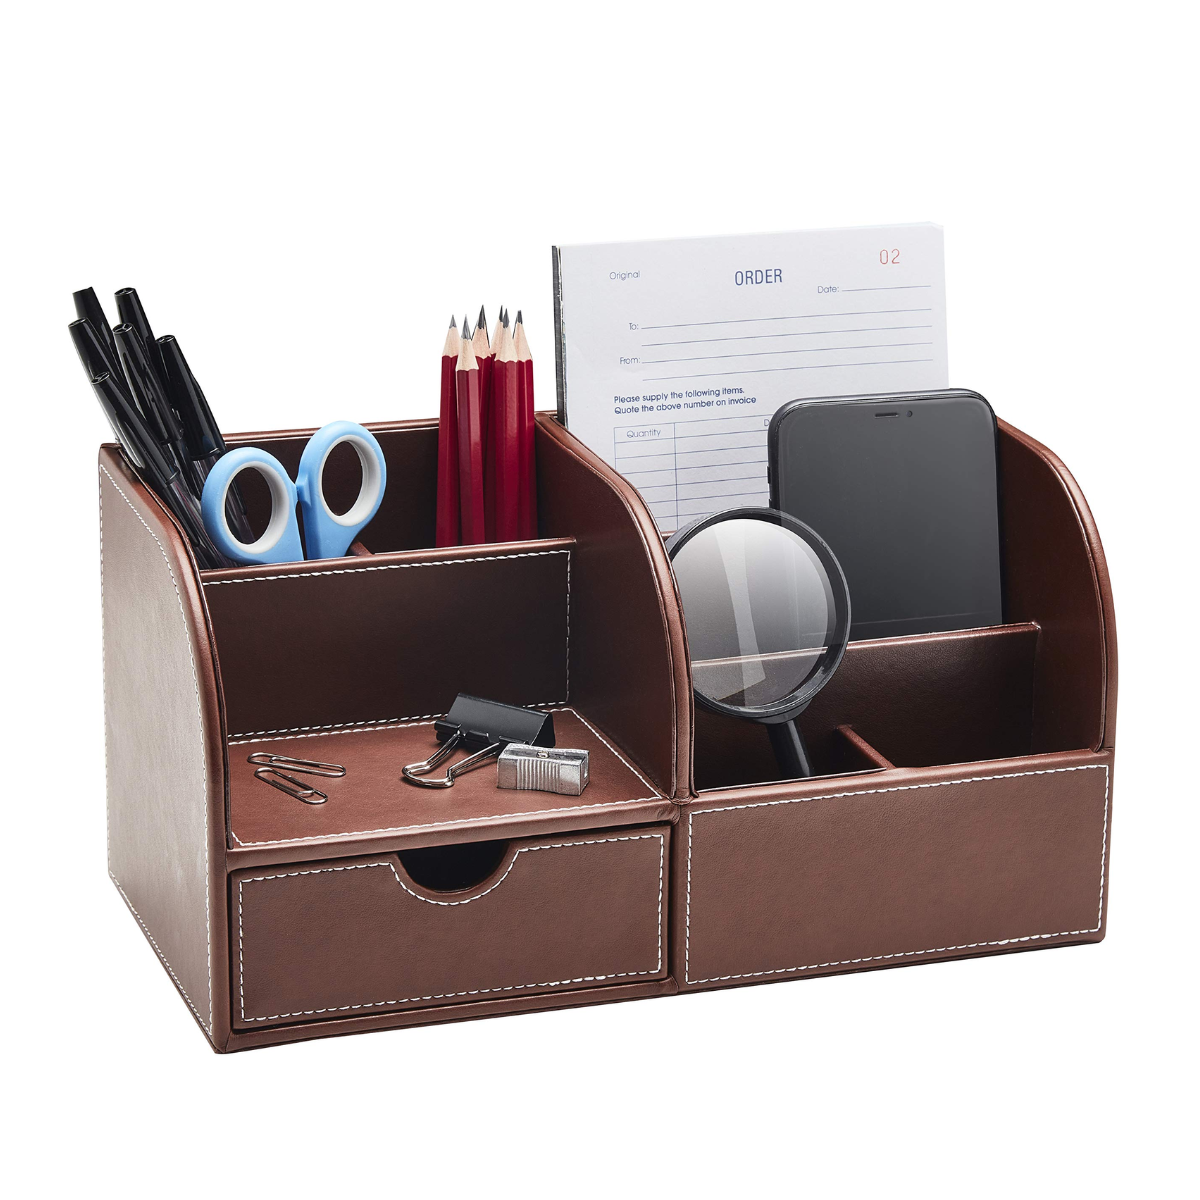 13. Organize Your Love Story: Leather Desk Organizer, the Perfect 3rd Anniversary Gift for Him